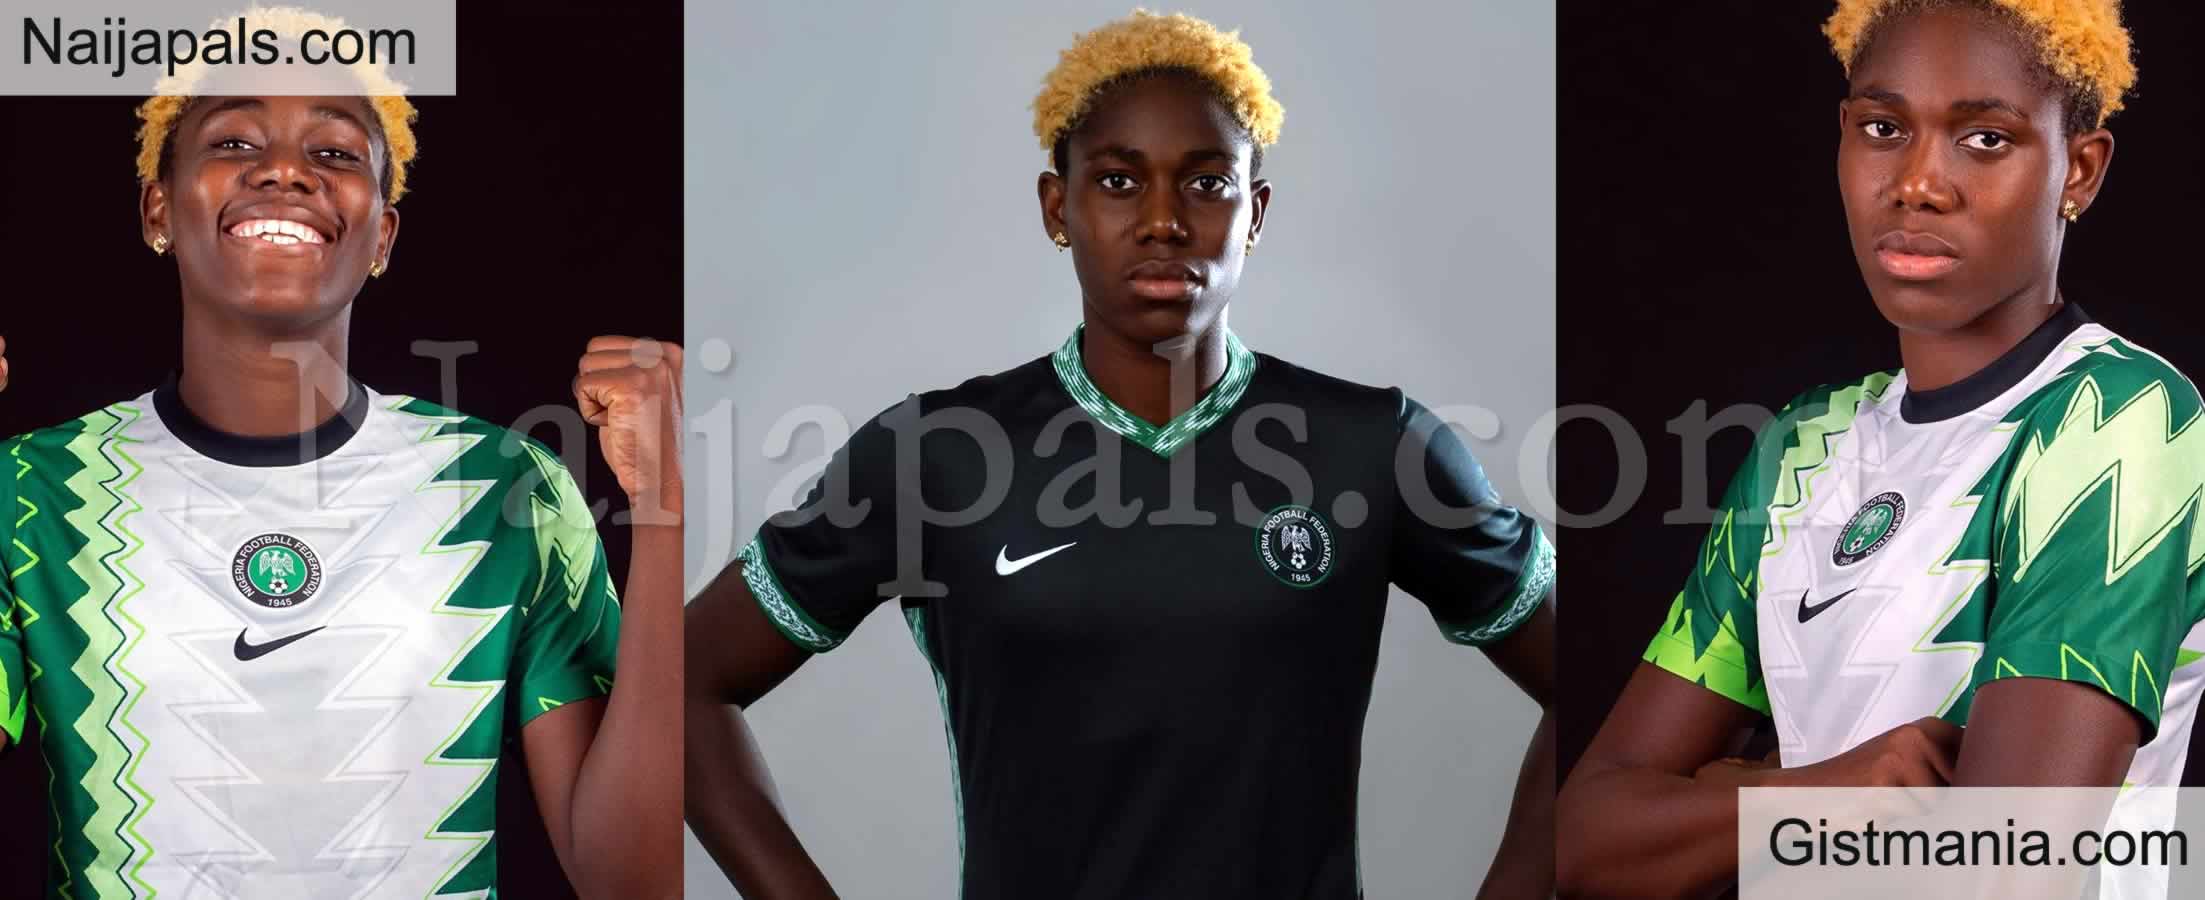 Photos Of the New Super Eagles Jersey As Modelled By Asisat